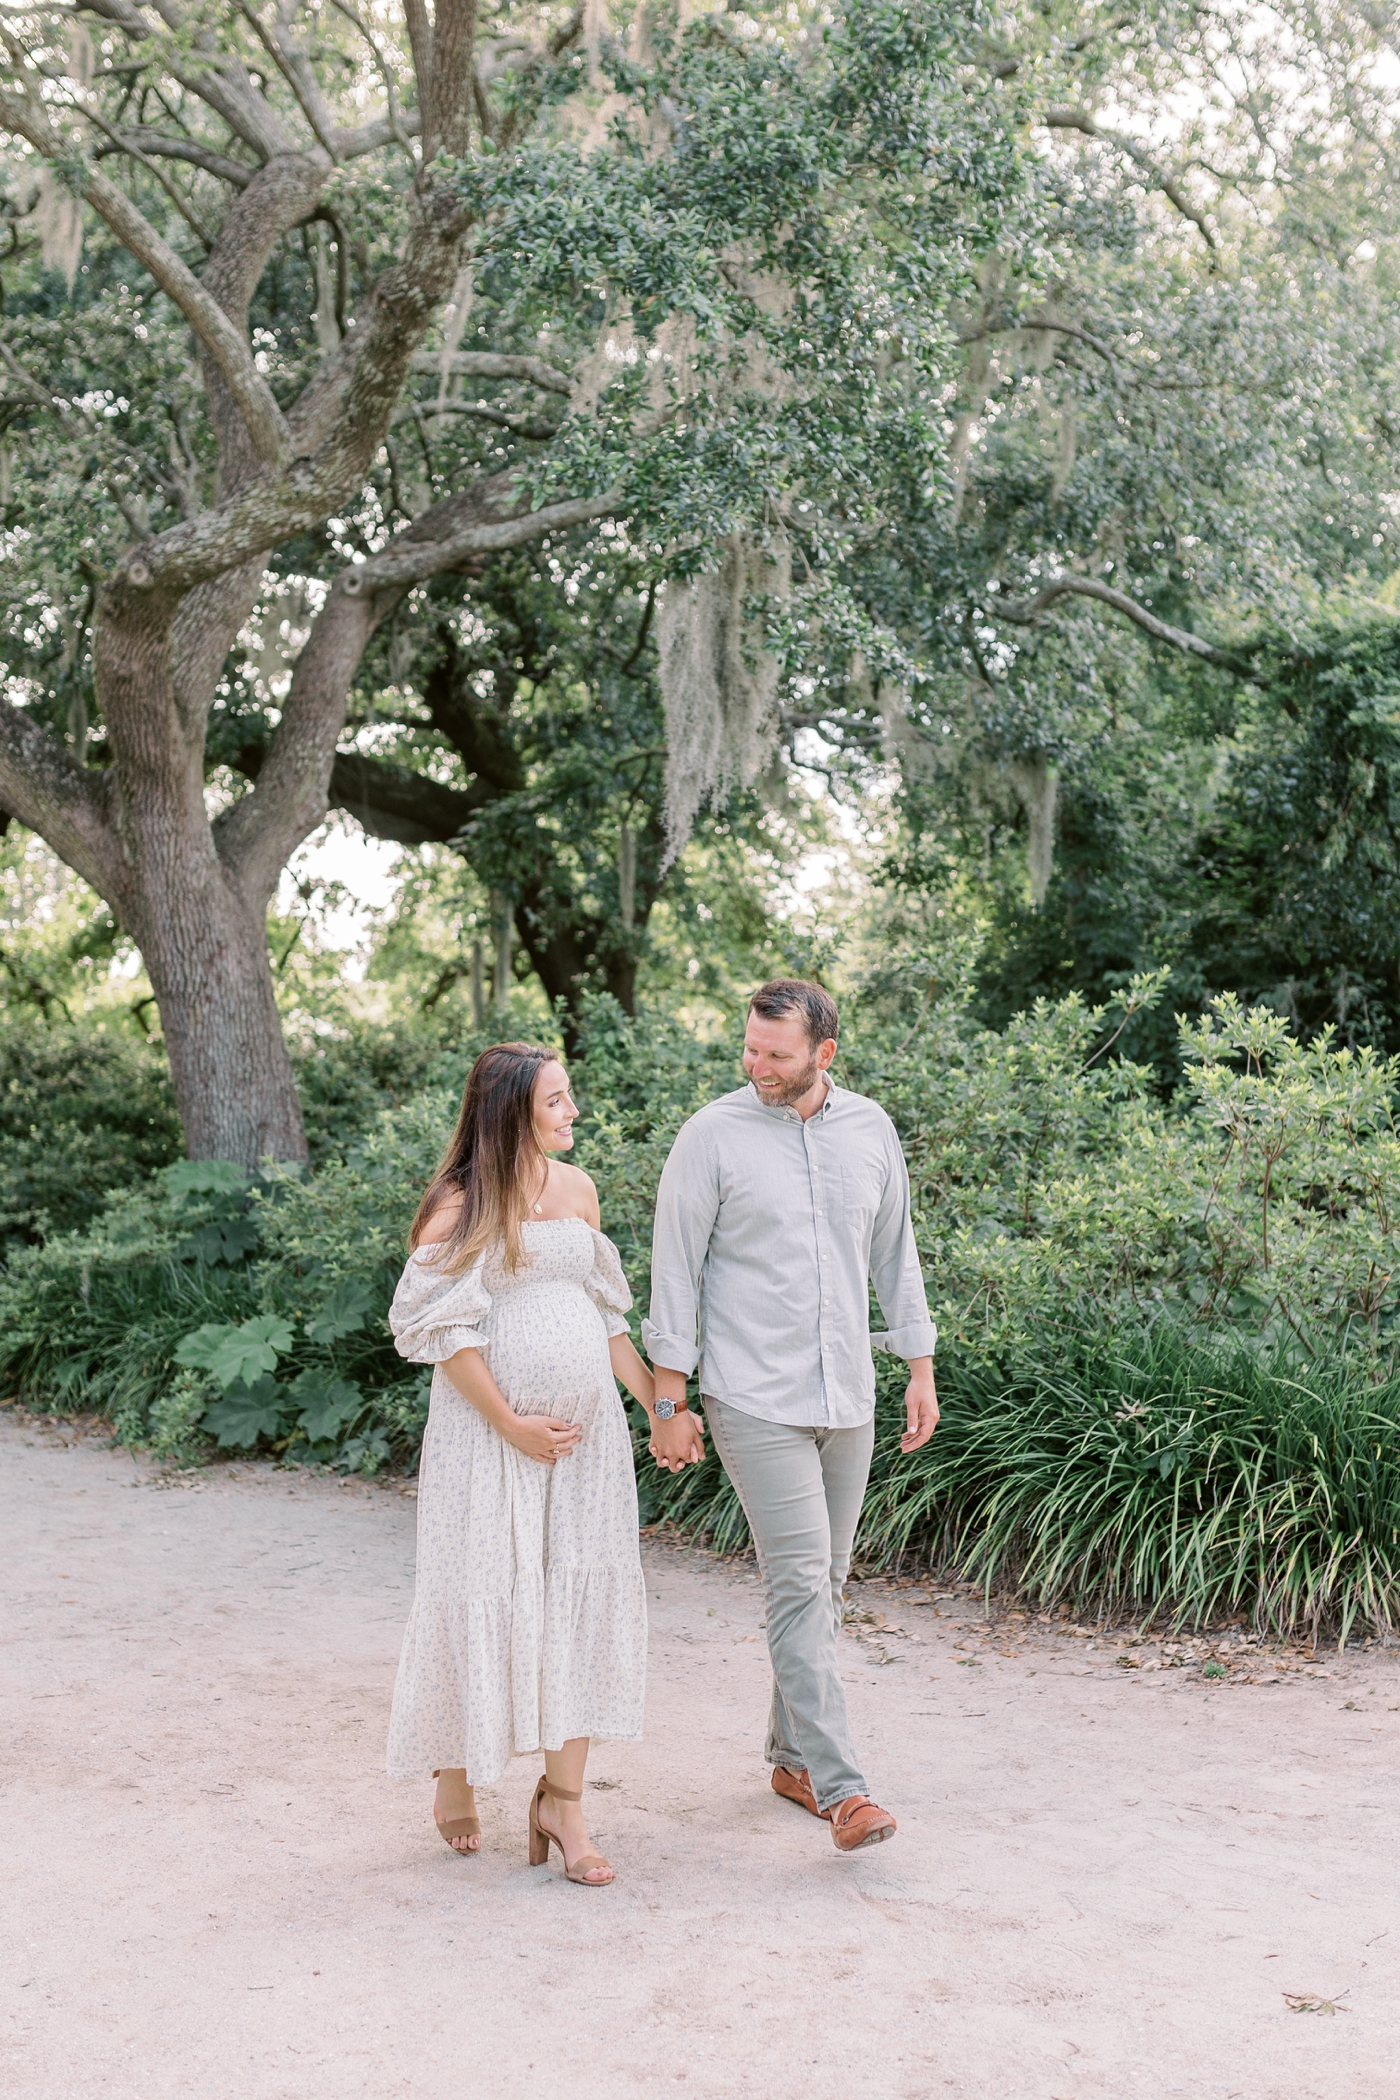 Mom and dad to be holding hands walking in Hampton Park | Photo by Caitlyn Motycka Photography.